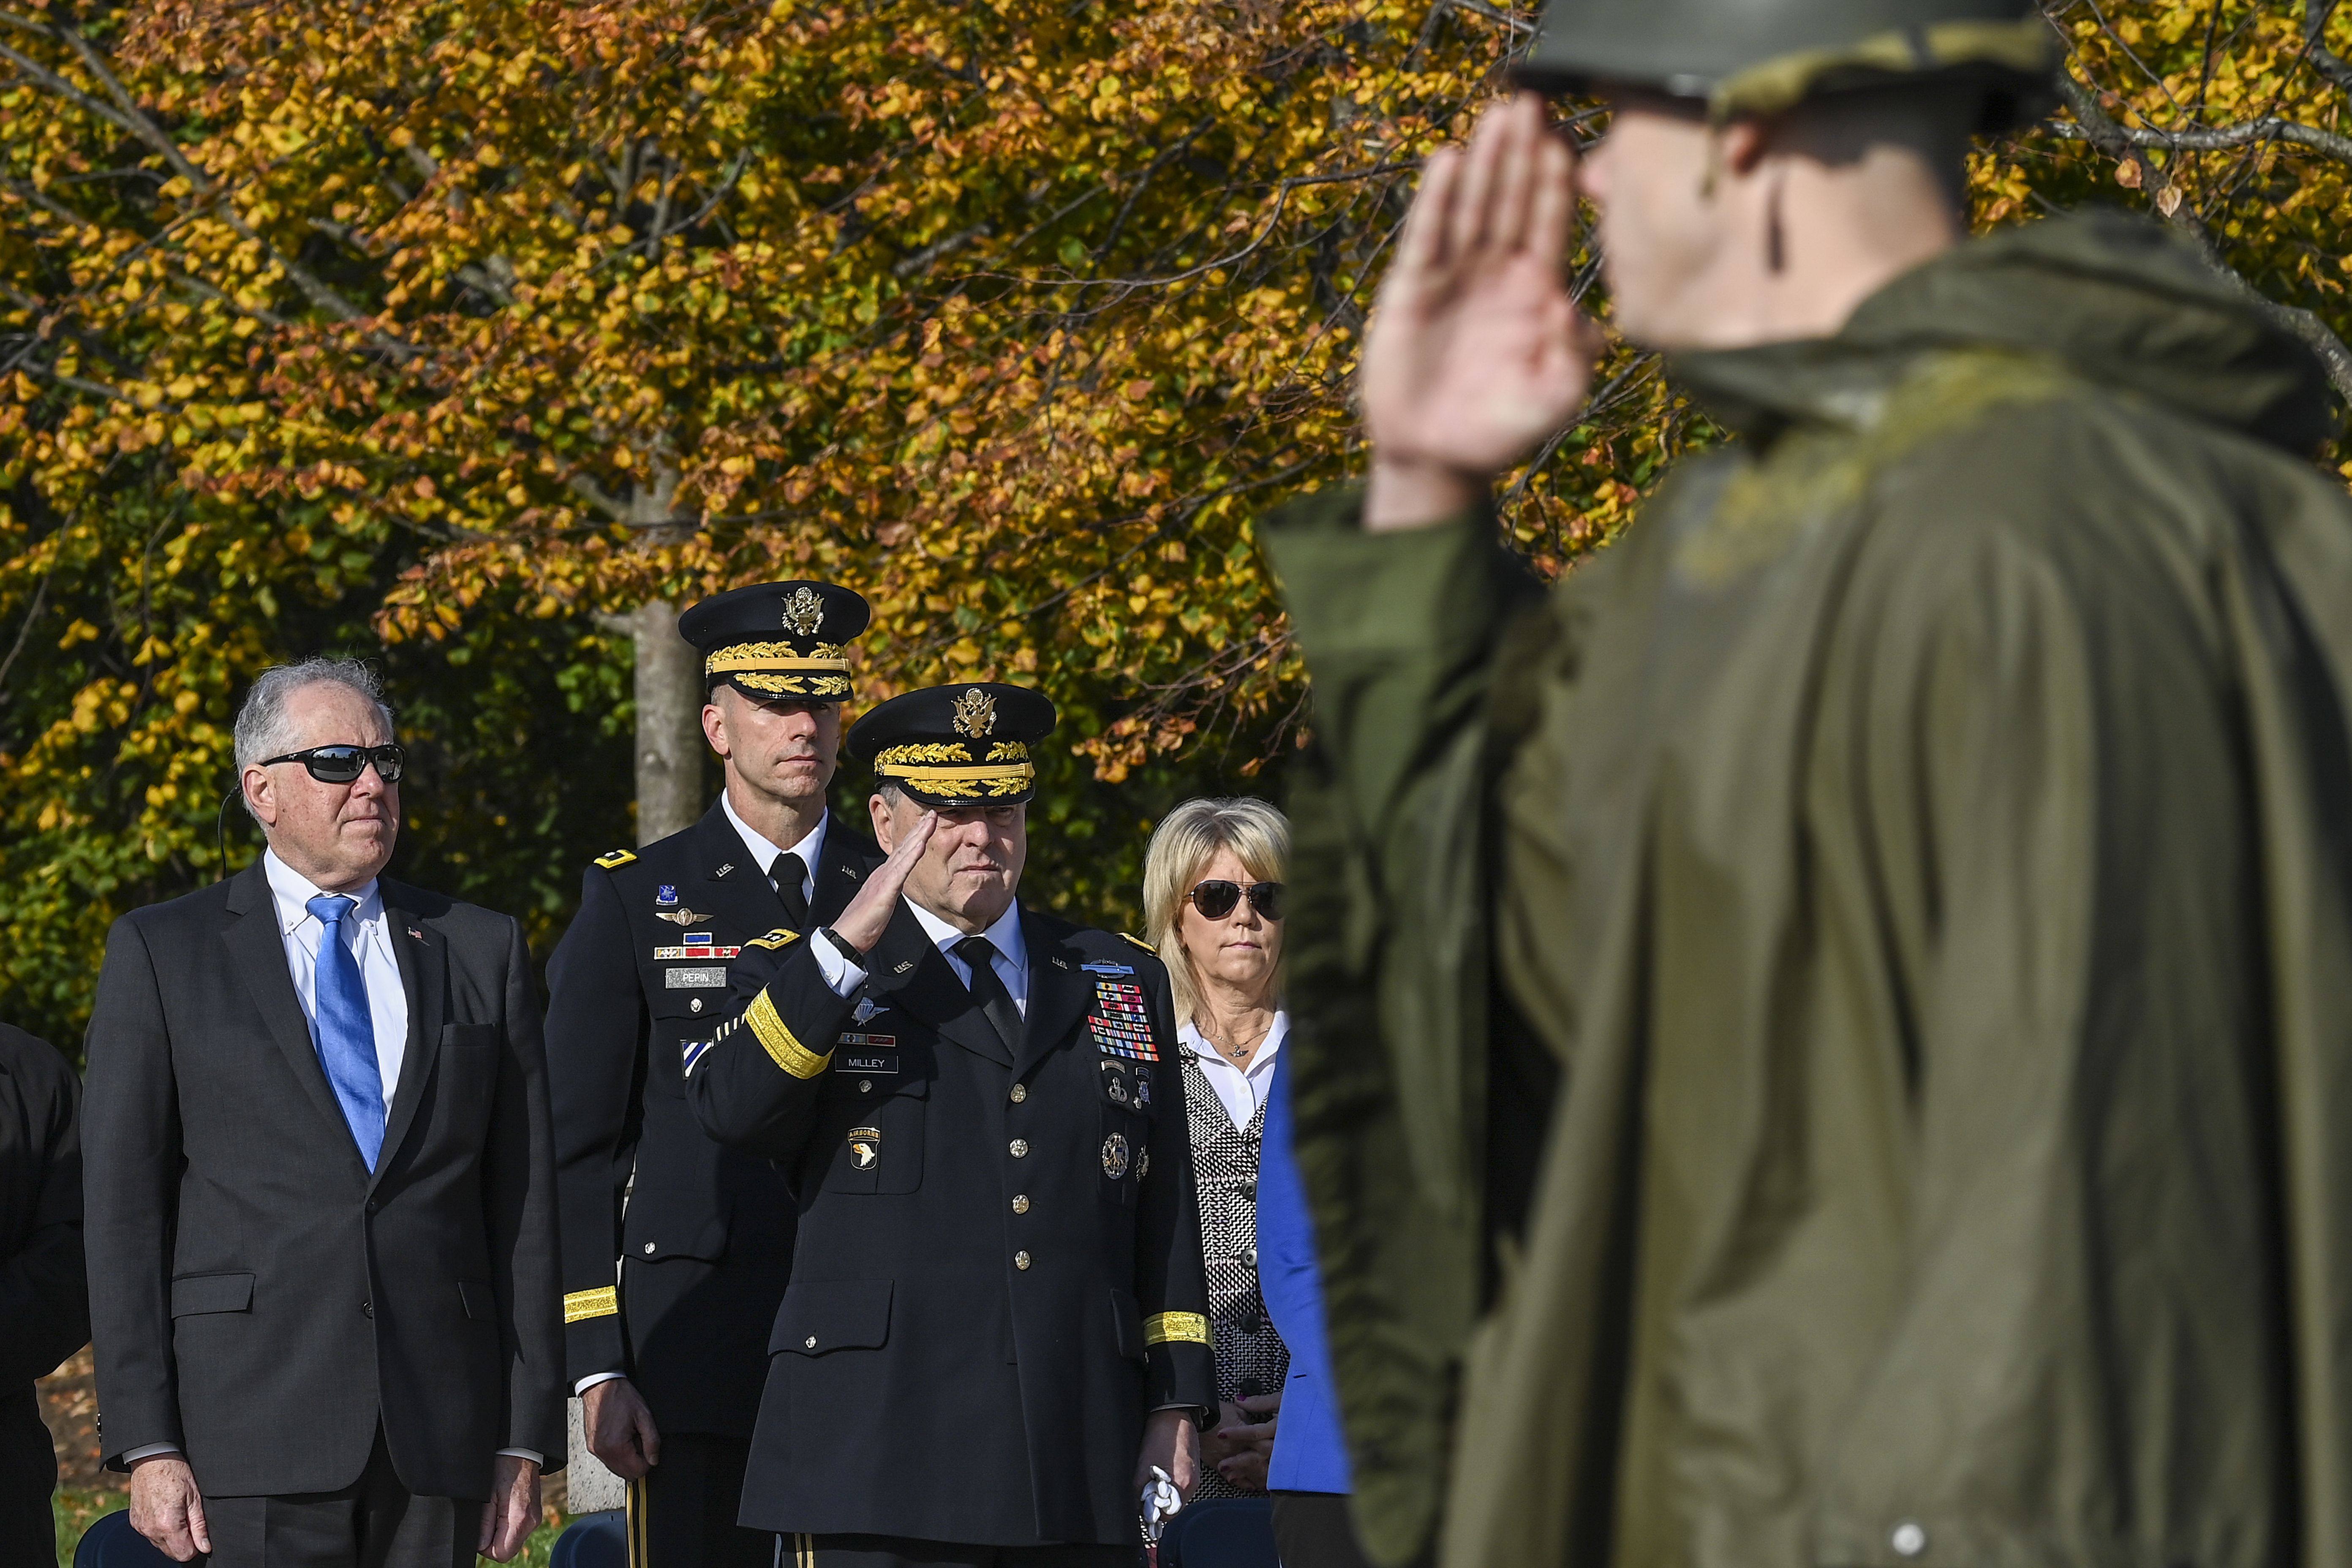 Chairman of the Joint Chiefs of Staff Gen. Mark Milley saluting service members during the centennial anniversary of the Tomb of the Unknown Soldier at Arlington National Cemetery on Nov. 11, 2021.